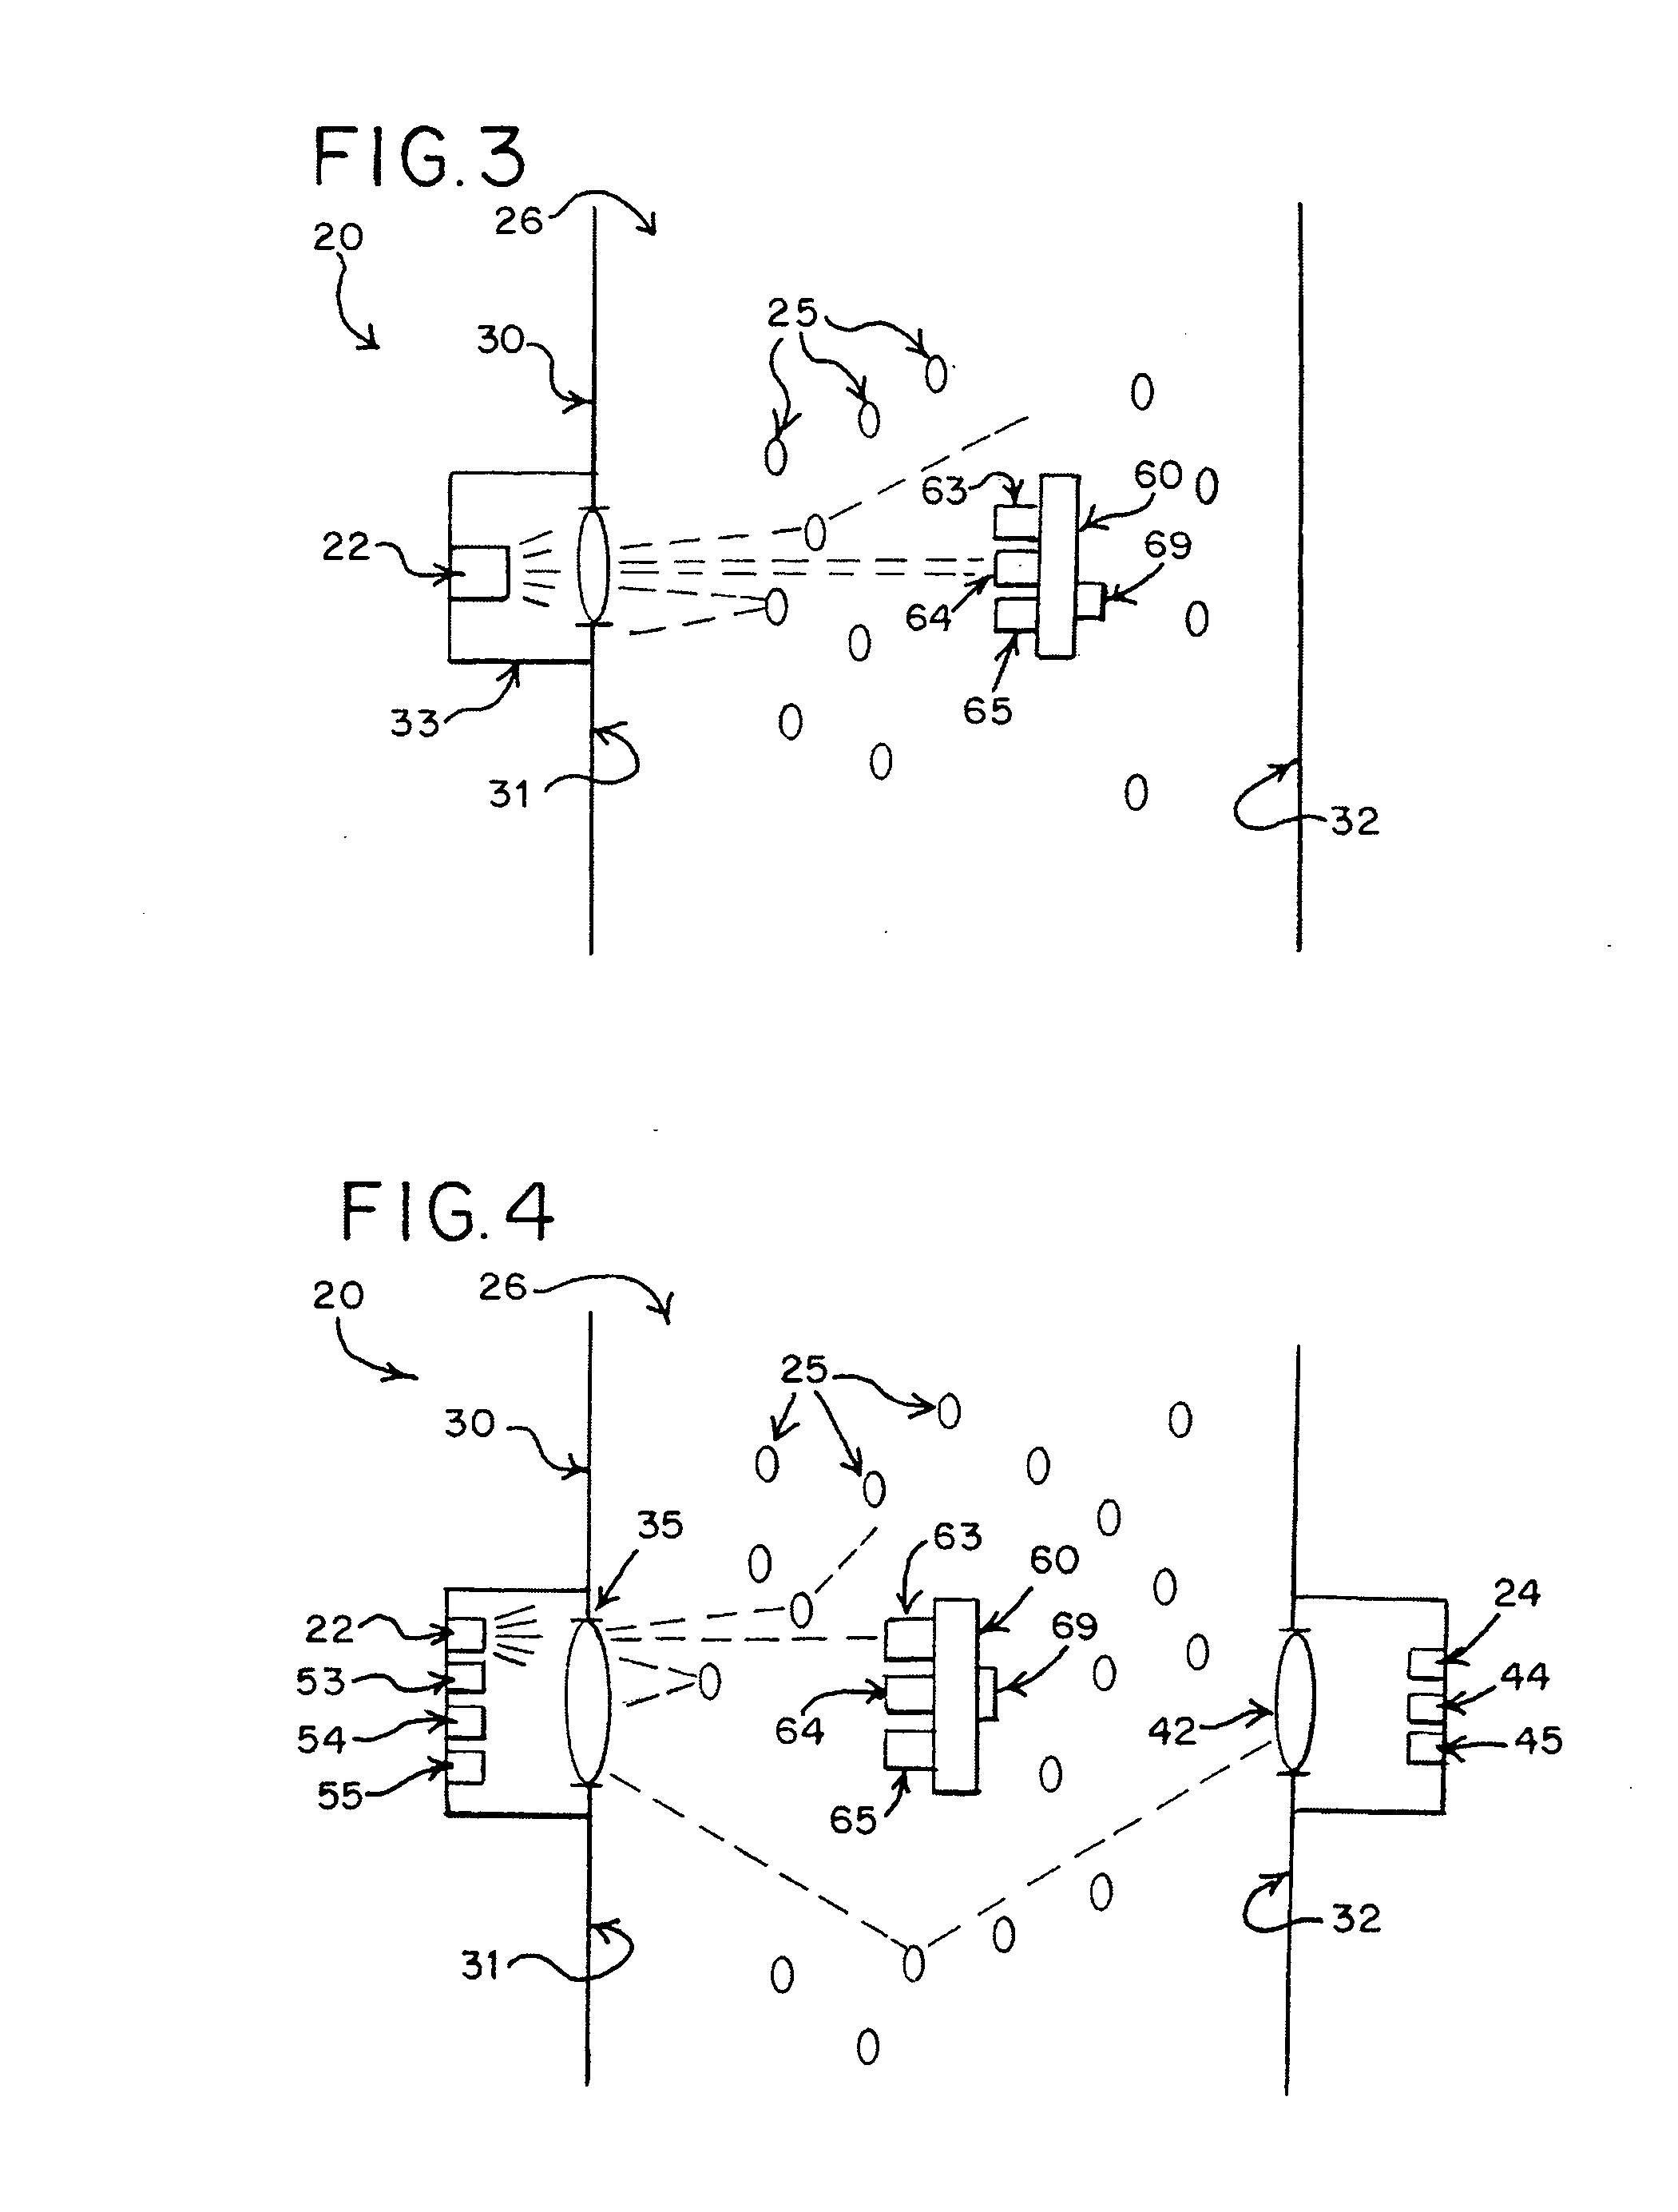 Apparatus, system and method for using an LED to identify a presence of a material in a gas and/or a fluid and/or determine properties of the material